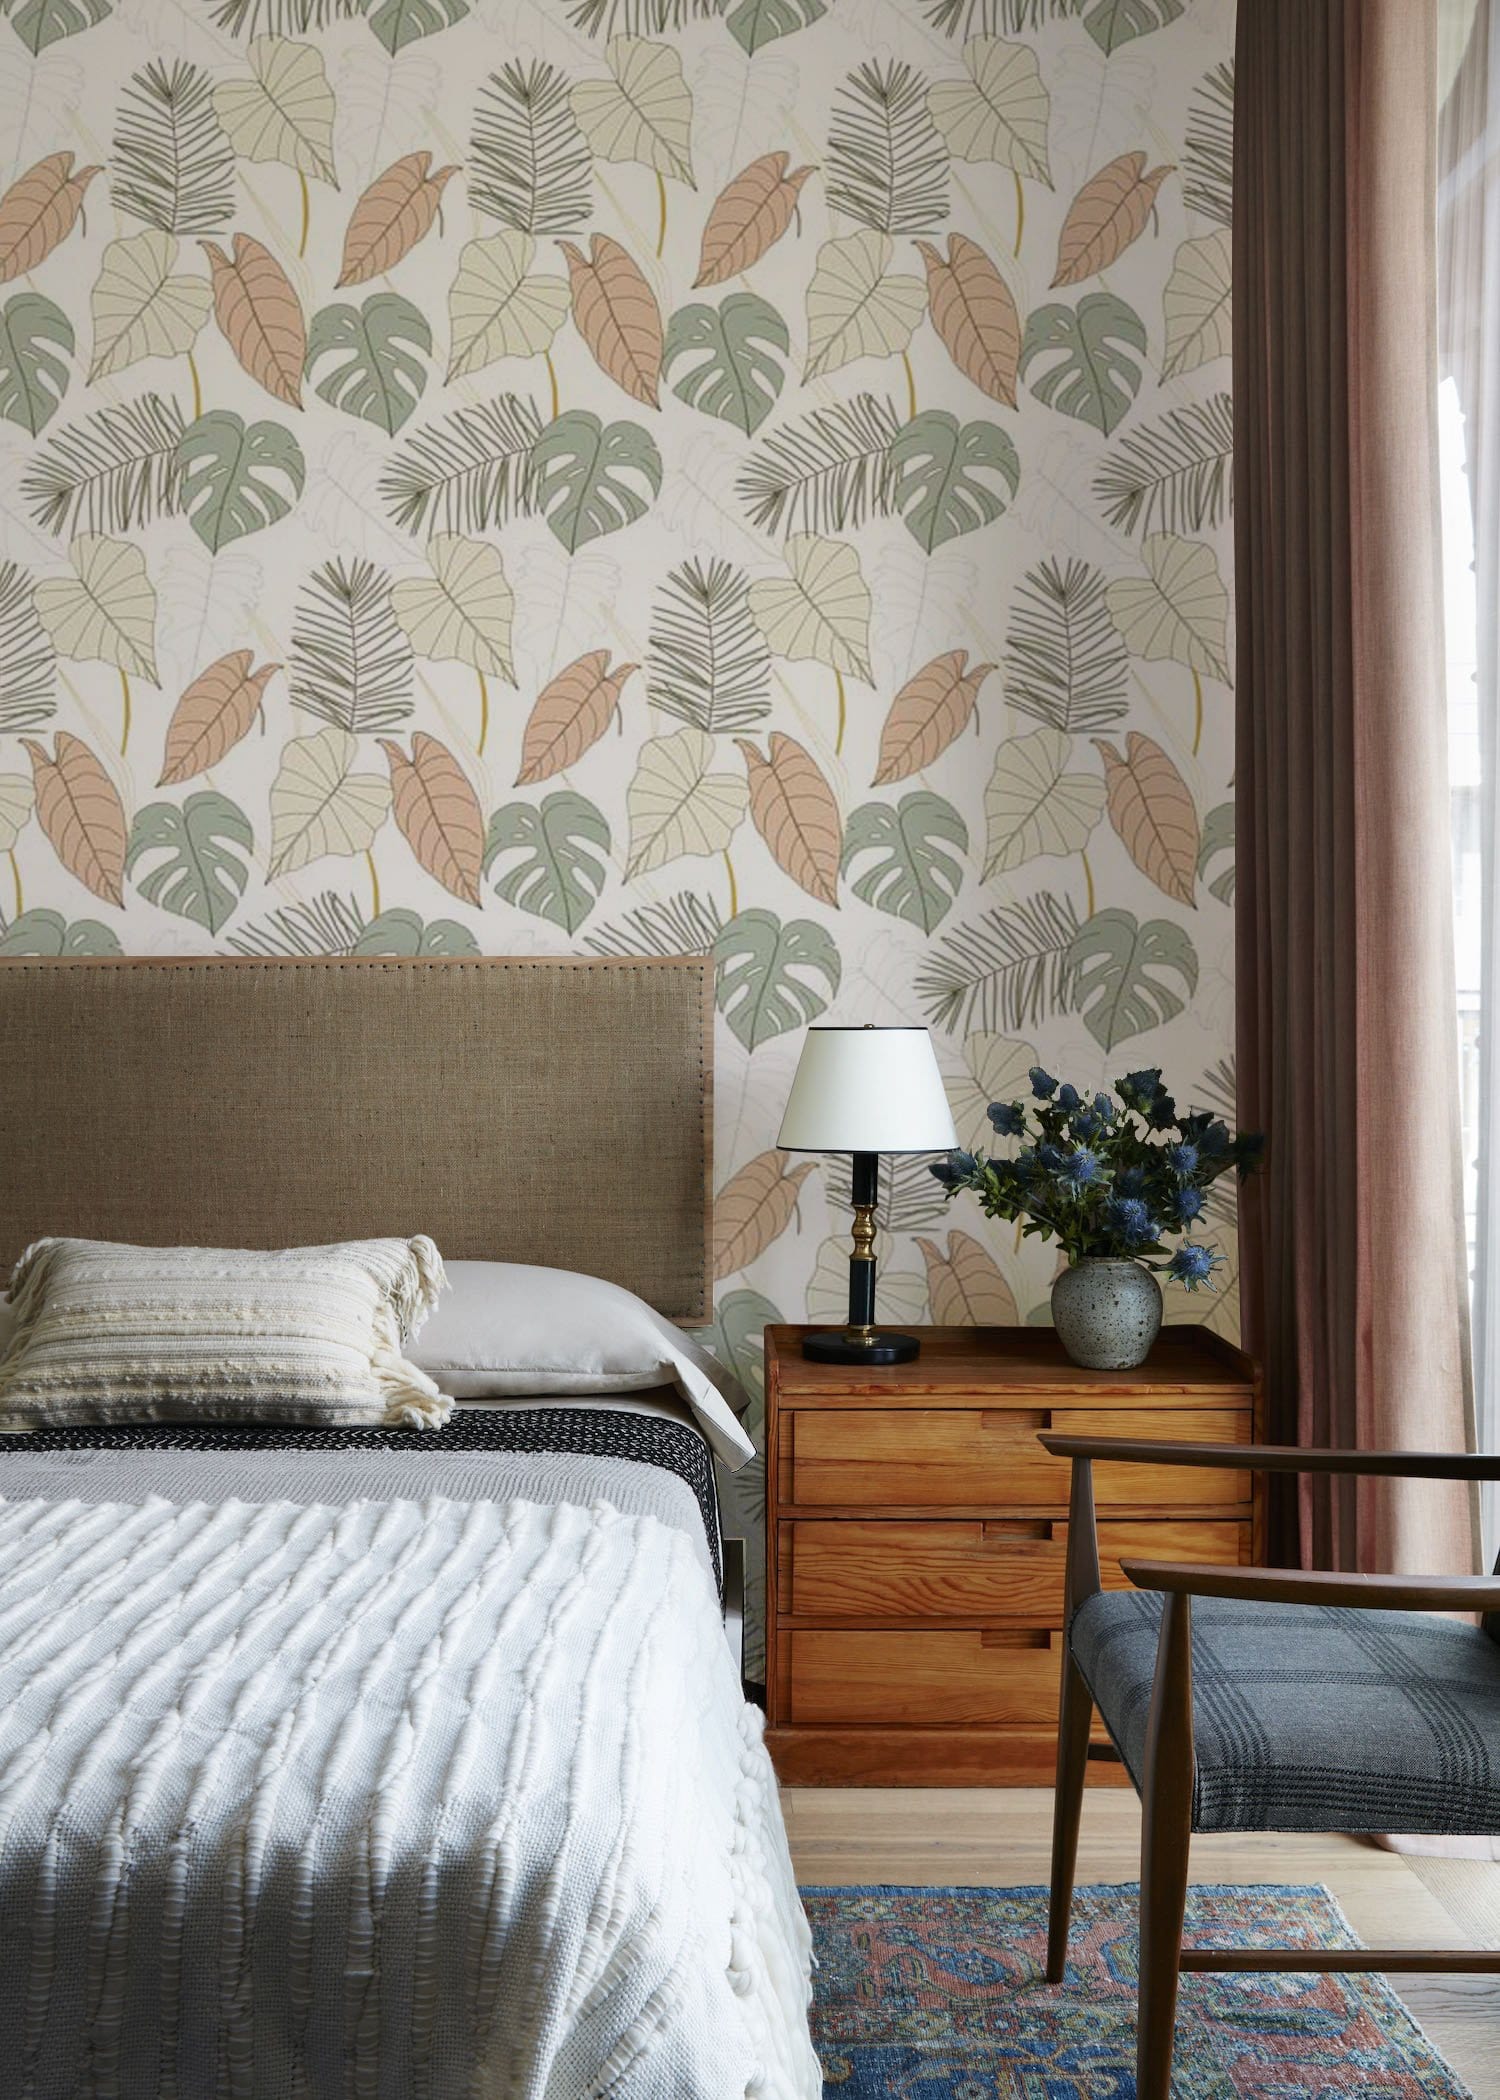 Wall mural wallpaper with trees and leaves, suitable for use as bedroom d��cor